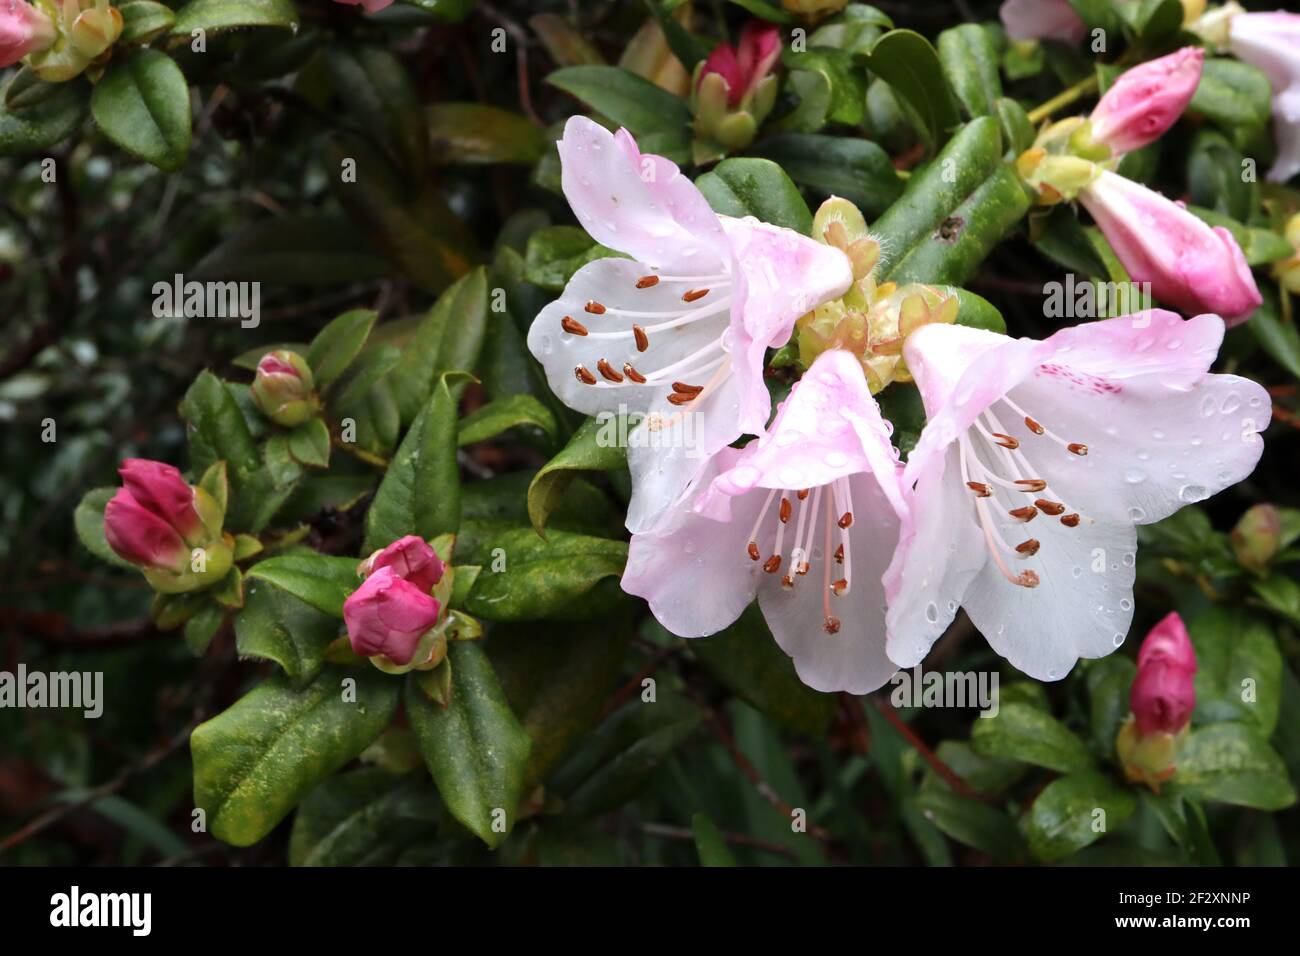 Rhododendron pseudochrysanthum false-gold-flower rhododendron – white flowers with pink petal backs,  March, England, UK Stock Photo